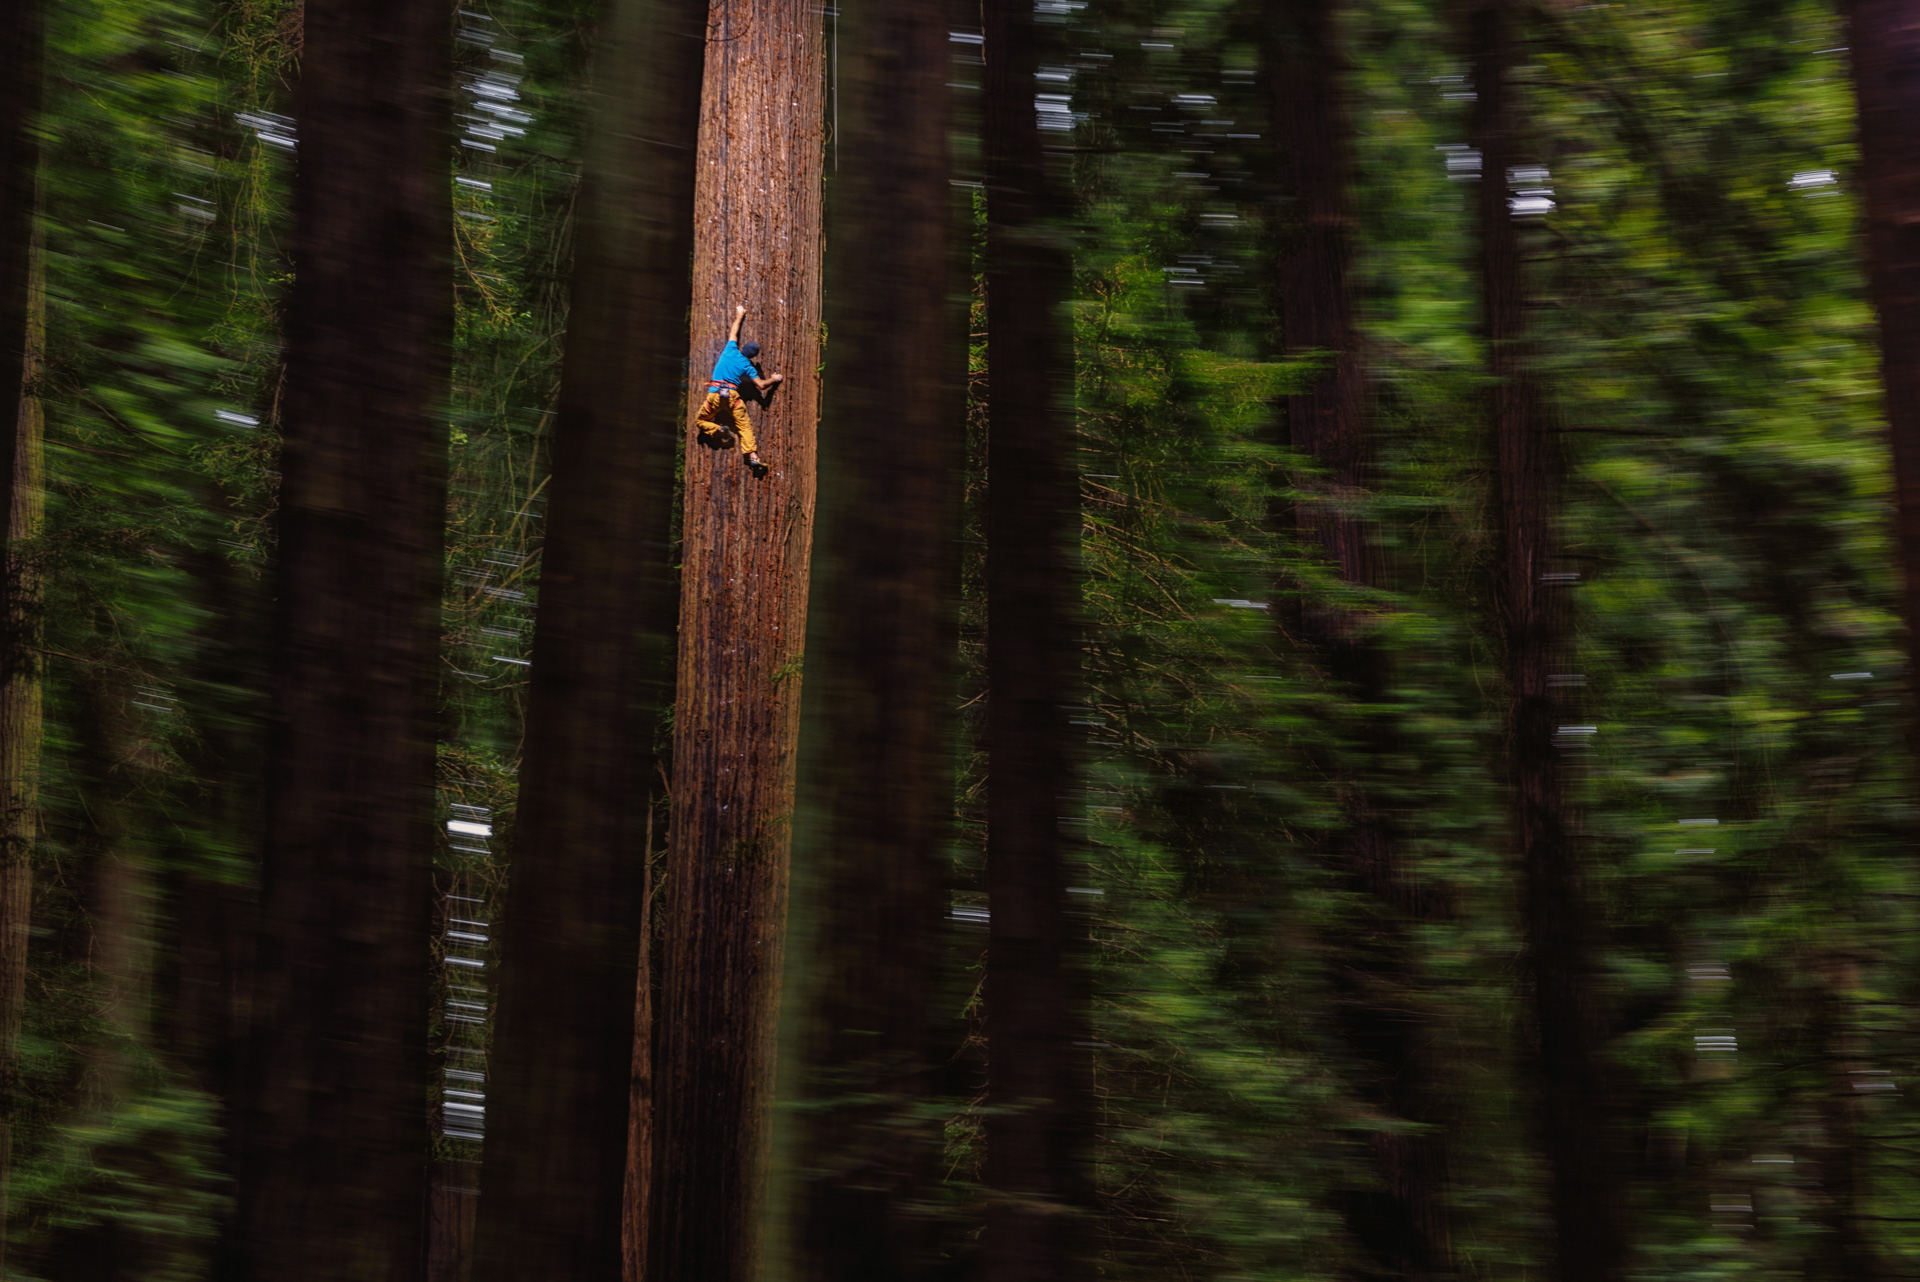 Watch This Guy Free-Climb A Giant Redwood